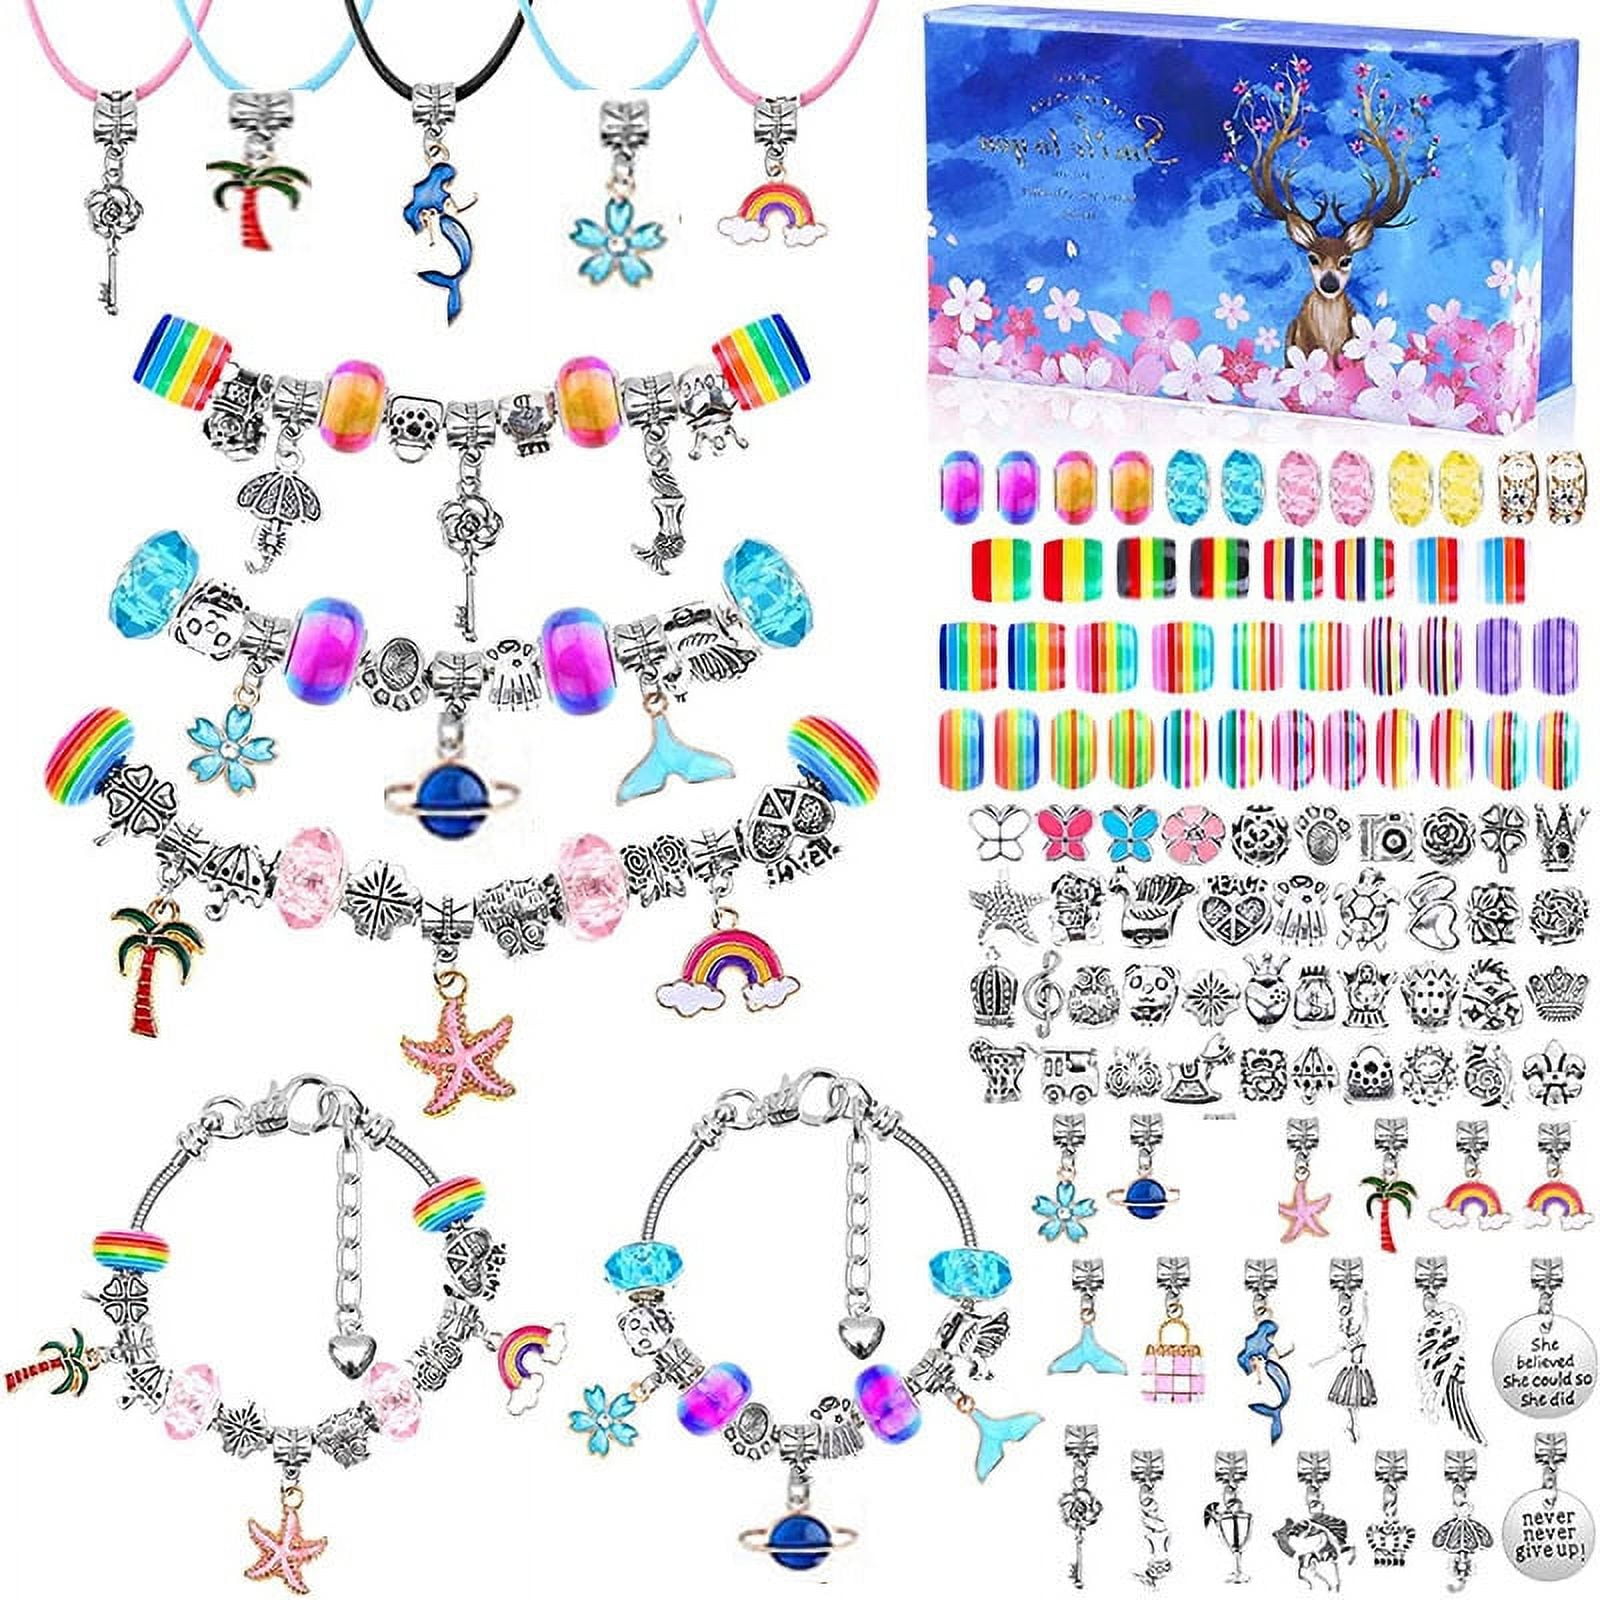 Charm Bracelet Making Kit, 112 Pcs DIY Jewelry Making Kit with  Bracelet,Pendant,Beads,Charms and Necklace String for Bracelets Craft &  Necklace Making, for Teen Girl Gifts Ages 8-12Y 